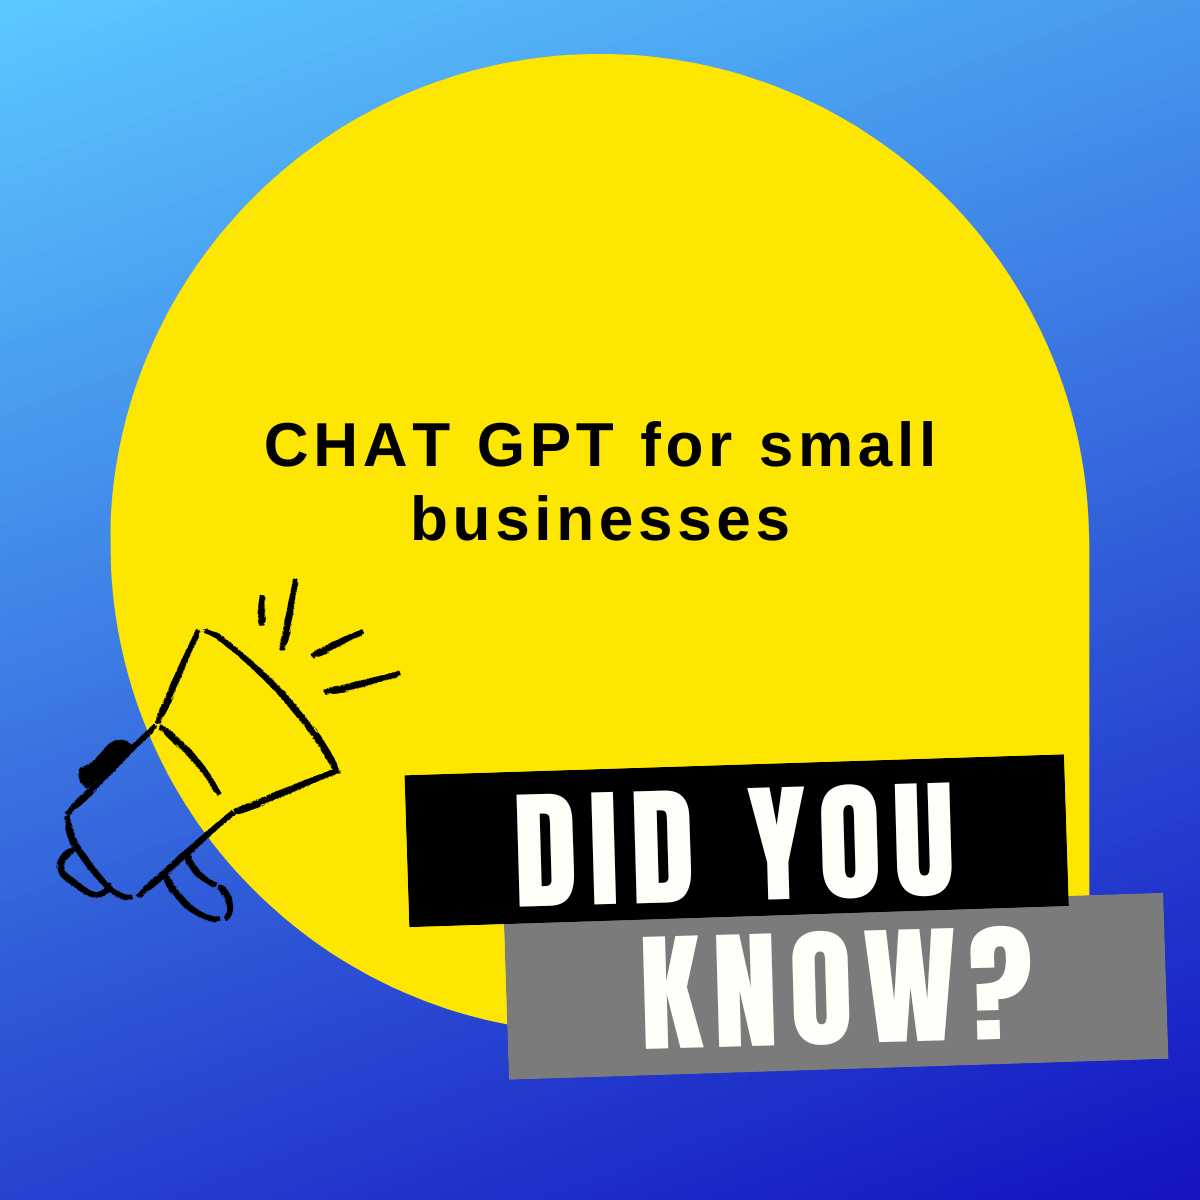 How can you use Chat GPT for your small business?